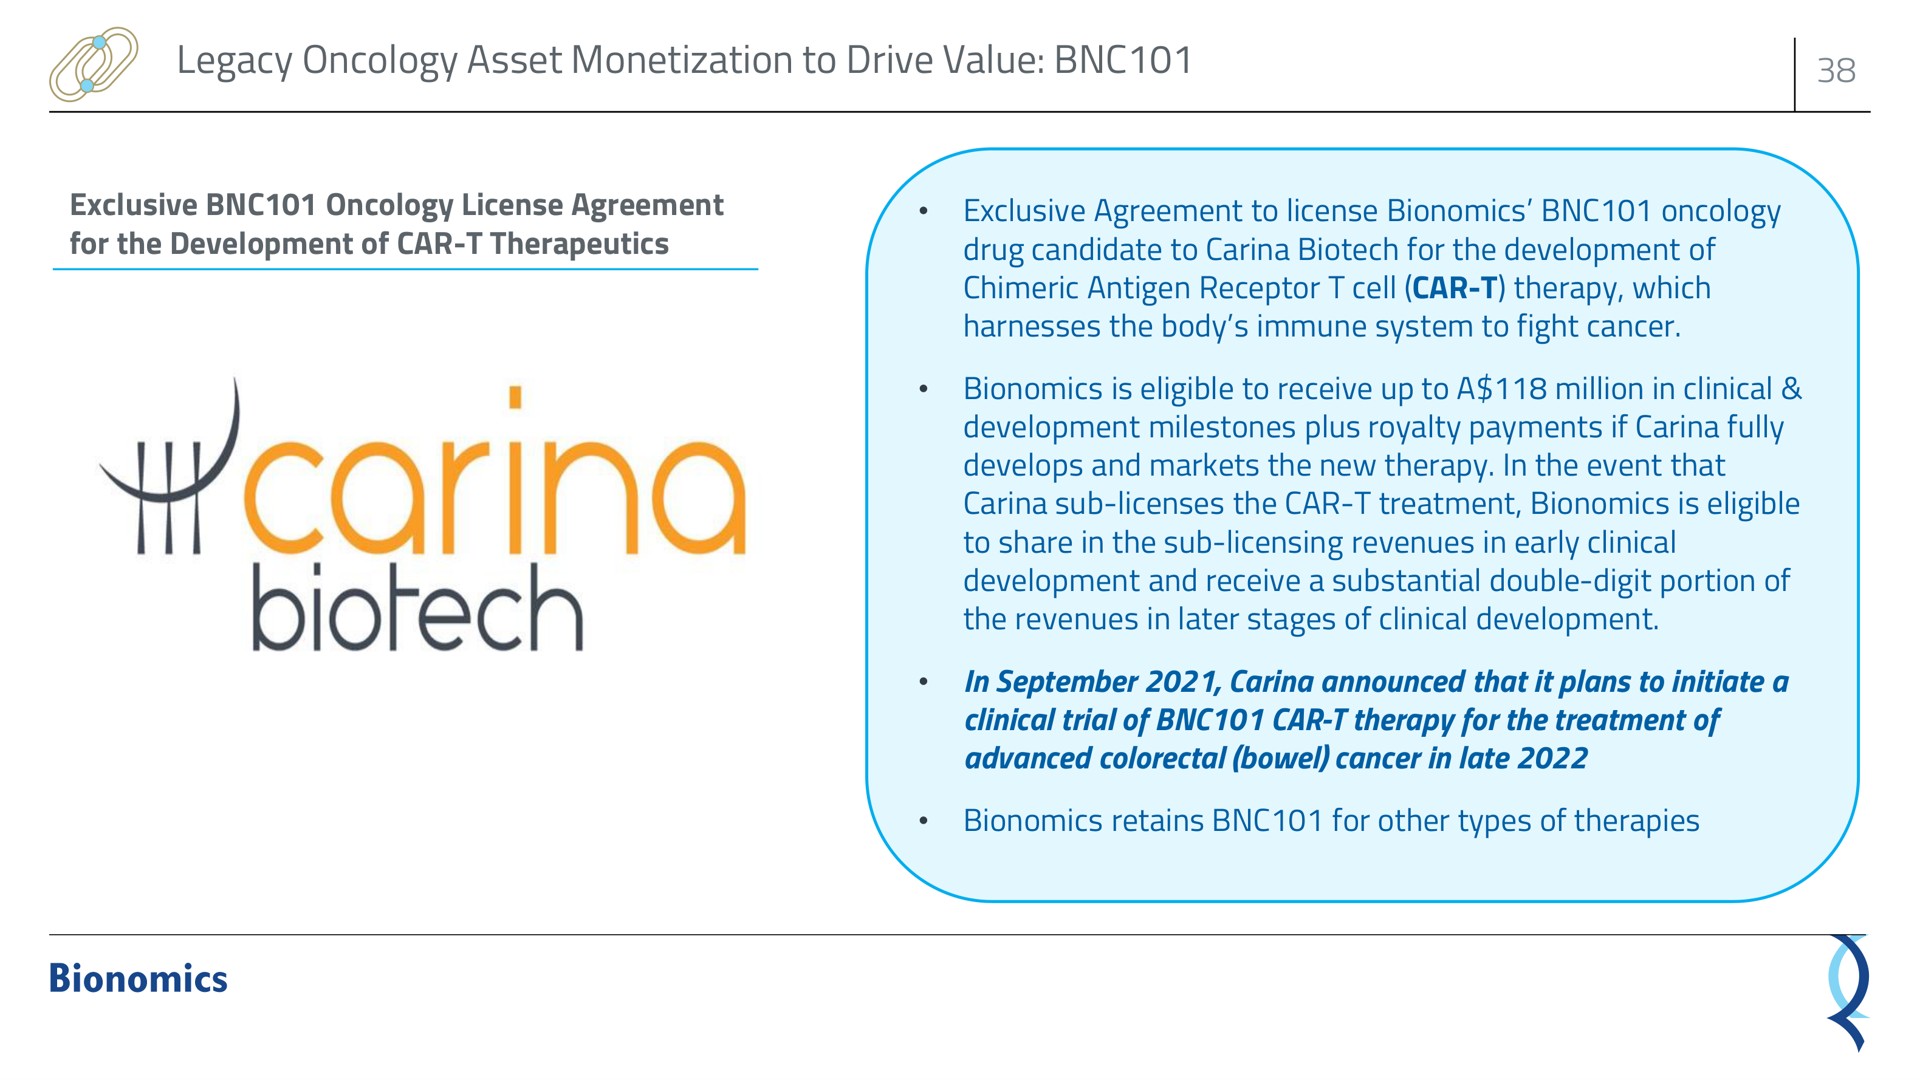 legacy oncology asset monetization to drive value exclusive license agreement for the development of car therapeutics exclusive agreement license bionomics drug candidate carina for the development of | Bionomics